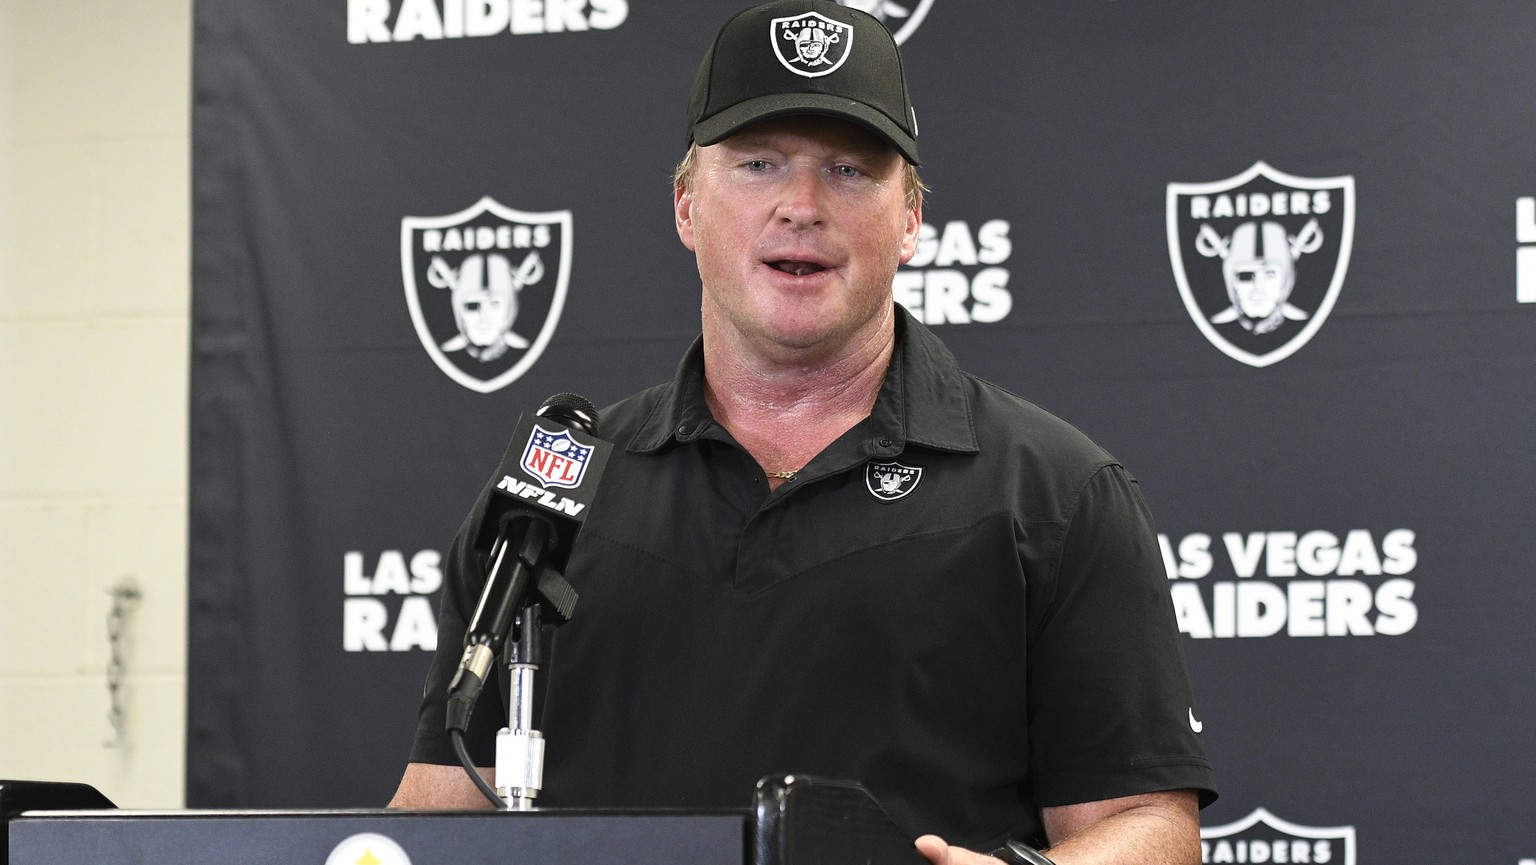 Las Vegas Raiders head coach Jon Gruden meets with the media following an NFL football game against the Pittsburgh Steelers in Pittsburgh, Sunday, Sept. 19, 2021. The Raiders won 26-17. (AP Photo/Don  ...